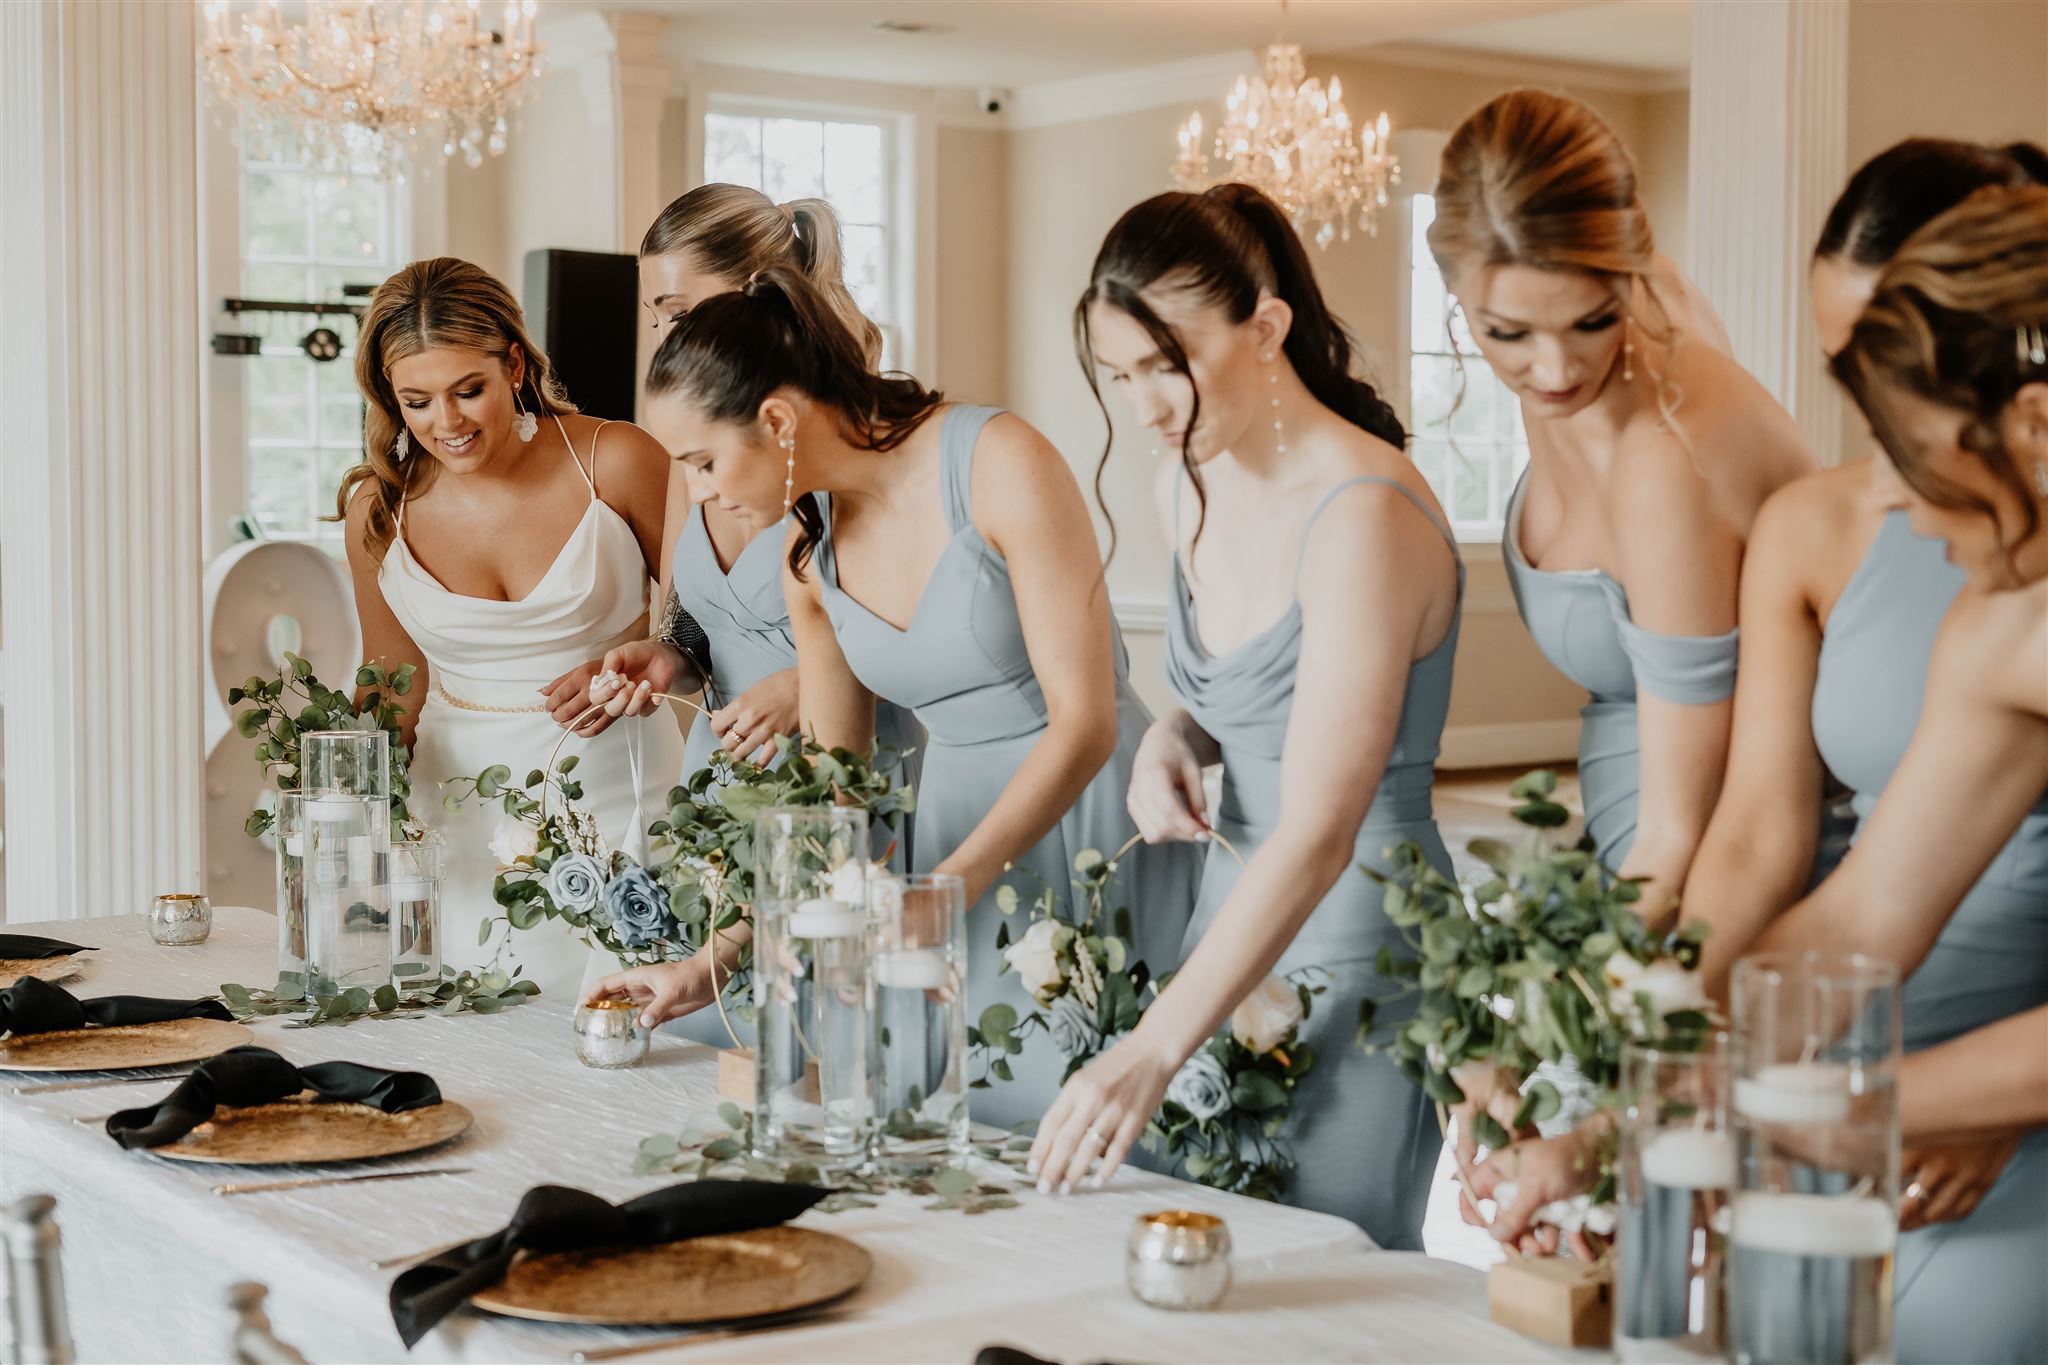 Bride and her bridesmaids enjoying the details of the reception at Separk Mansion in Gastonia, NC photographed by Christina of The Shutter Owl Photography